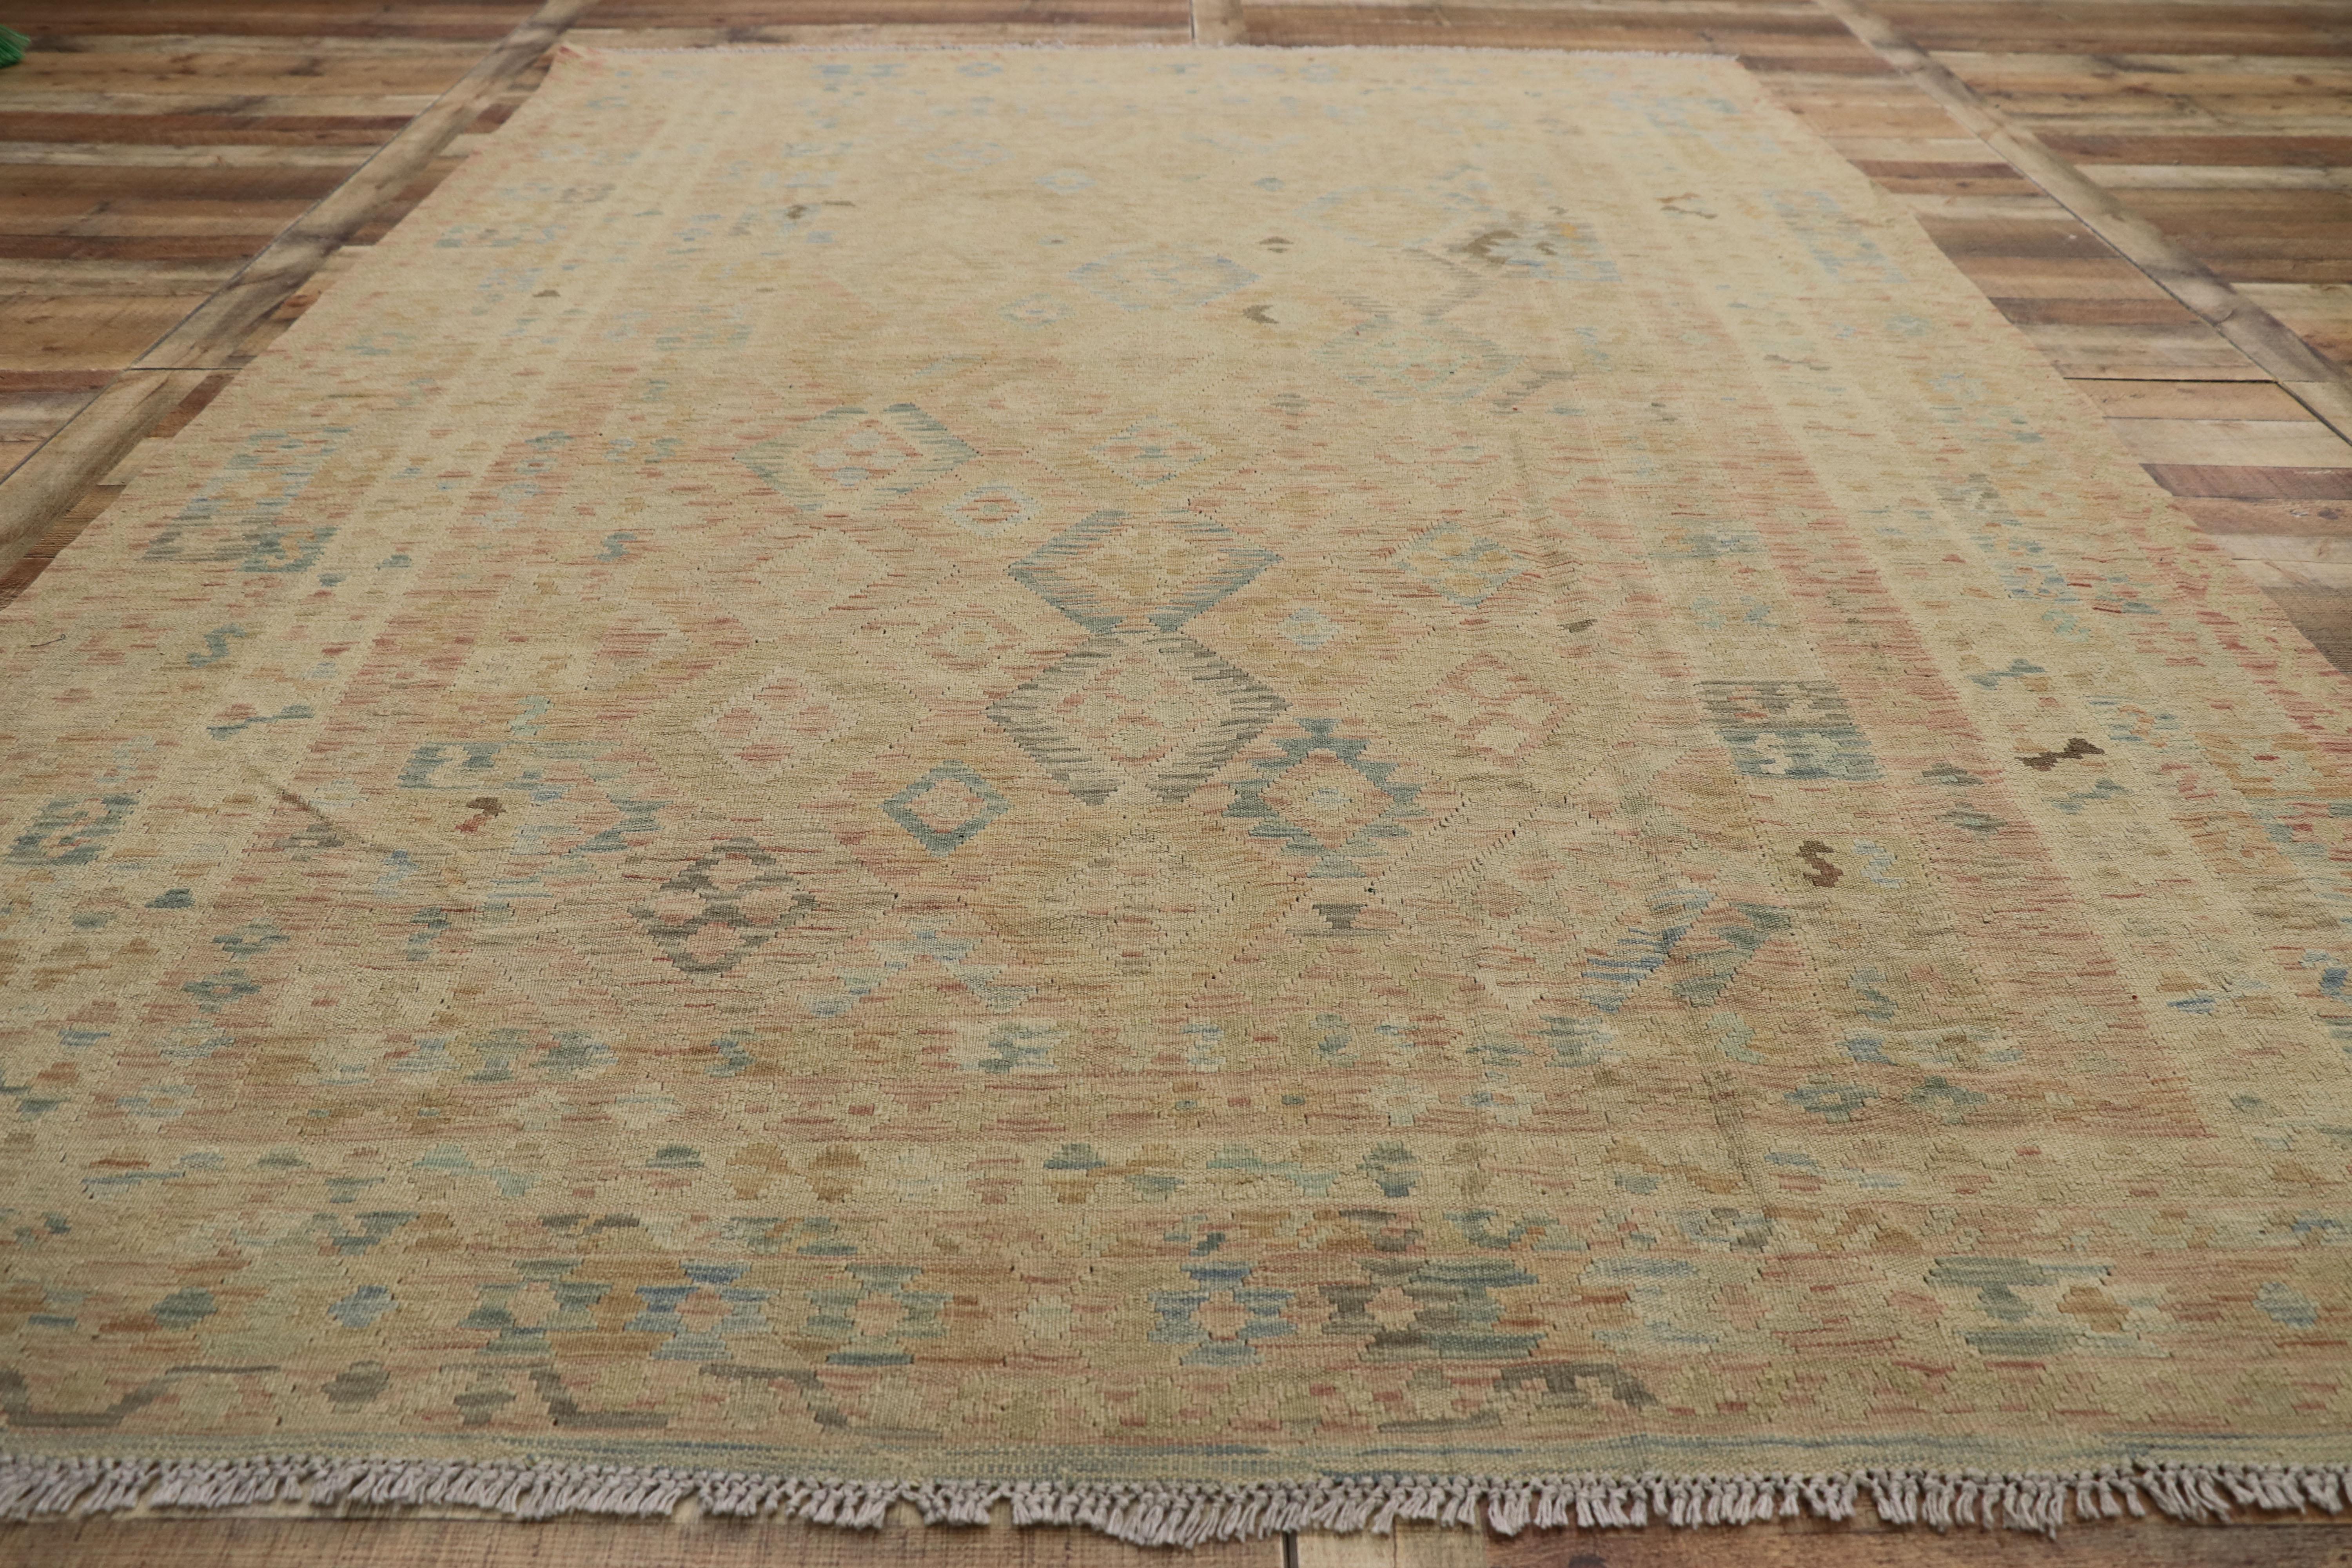 Wool Vintage Muted Kilim Area Rug with Transitional Farmhouse Cottage Style